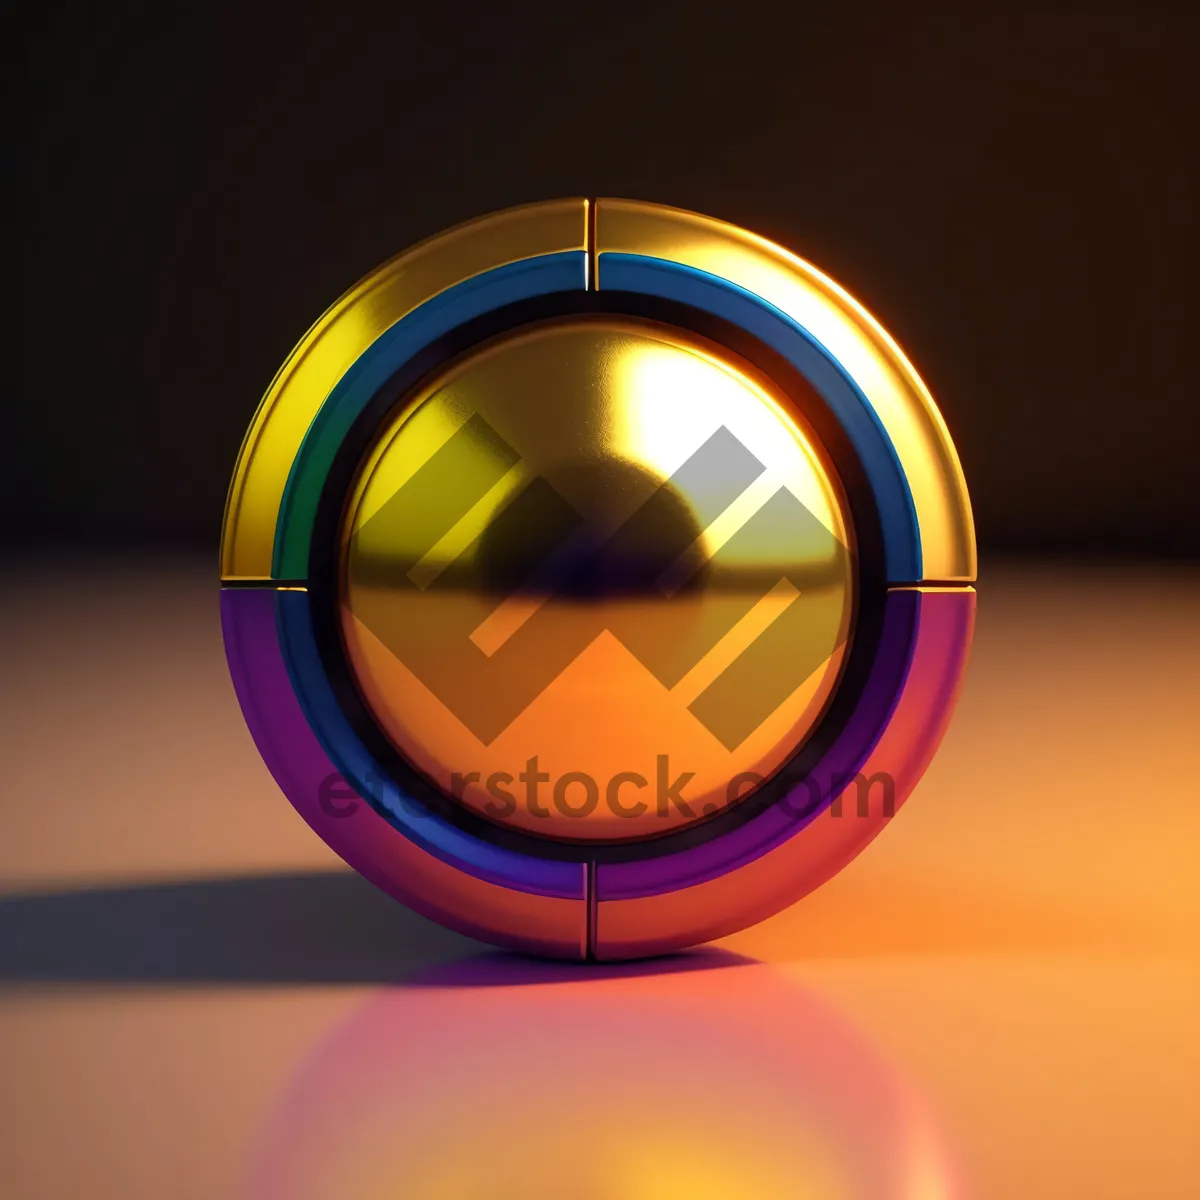 Picture of Shiny Glass Button: Modern, Bright, and Metallic.